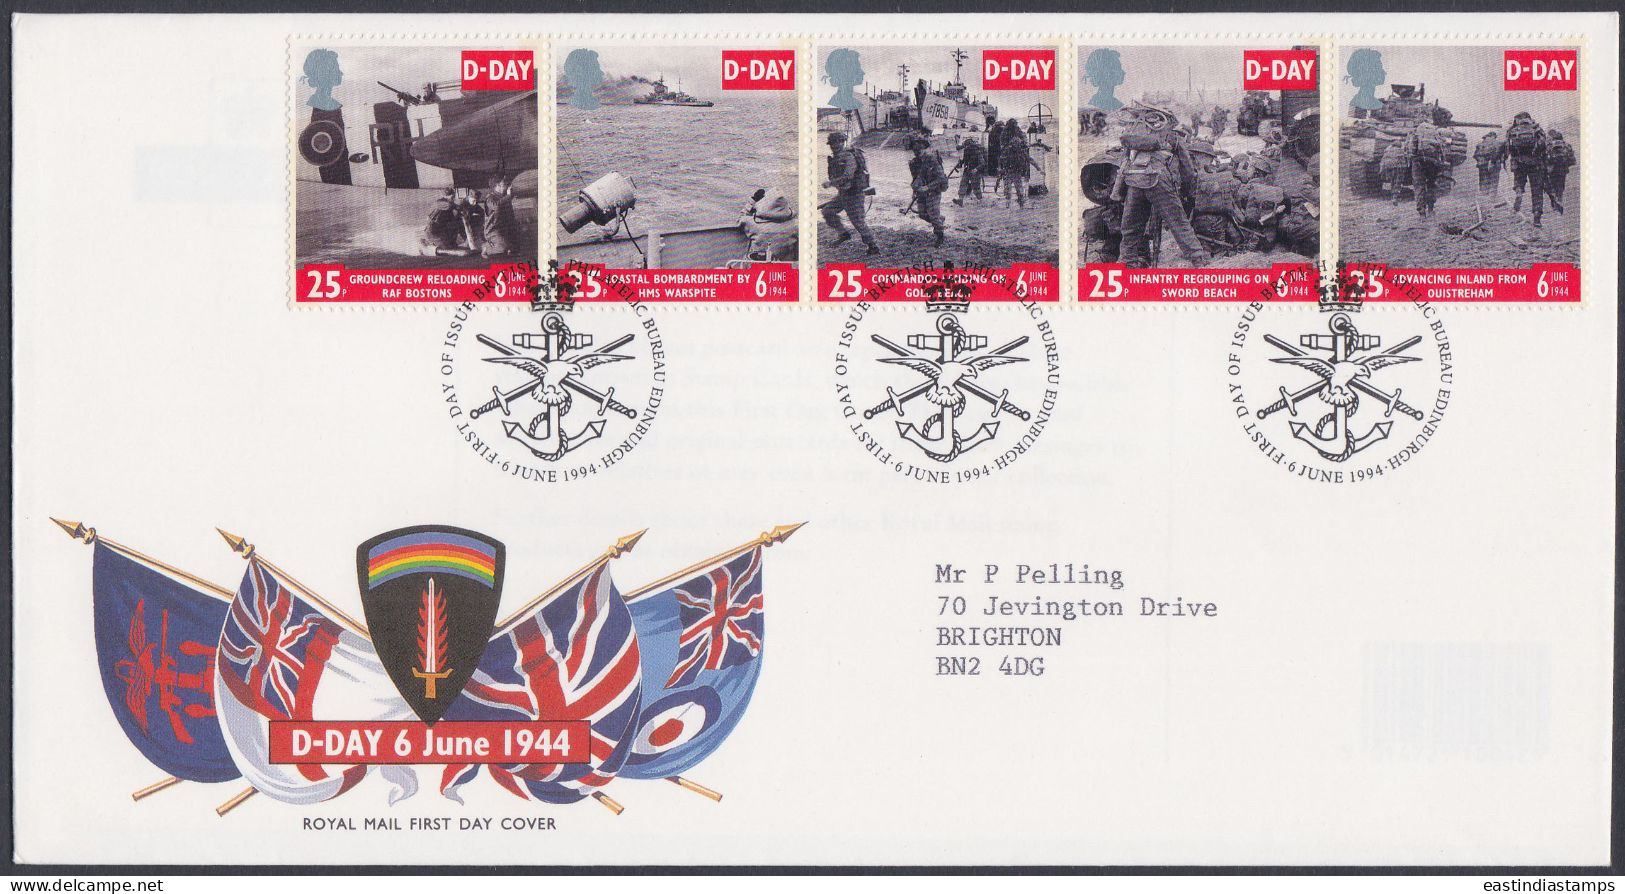 GB Great Britain 1994 FDC D-Day, World War 2, Wars, Soldier, Army, Navy, Ship, Tank, Pictorial Postmark, First Day Cover - Covers & Documents